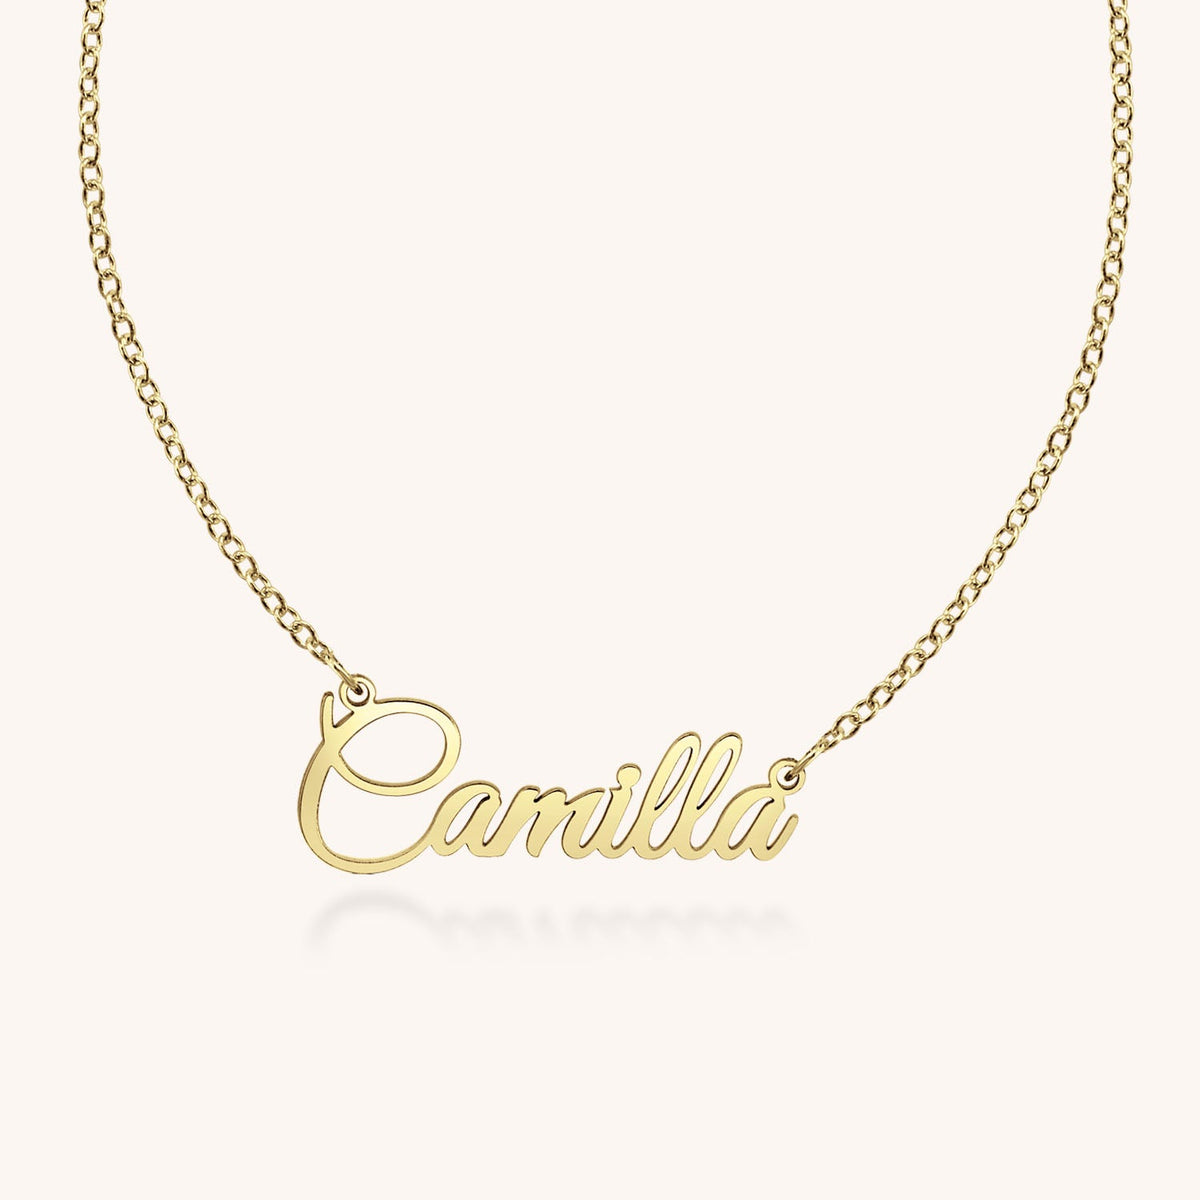 10k Gold Camilla Nameplate Necklace